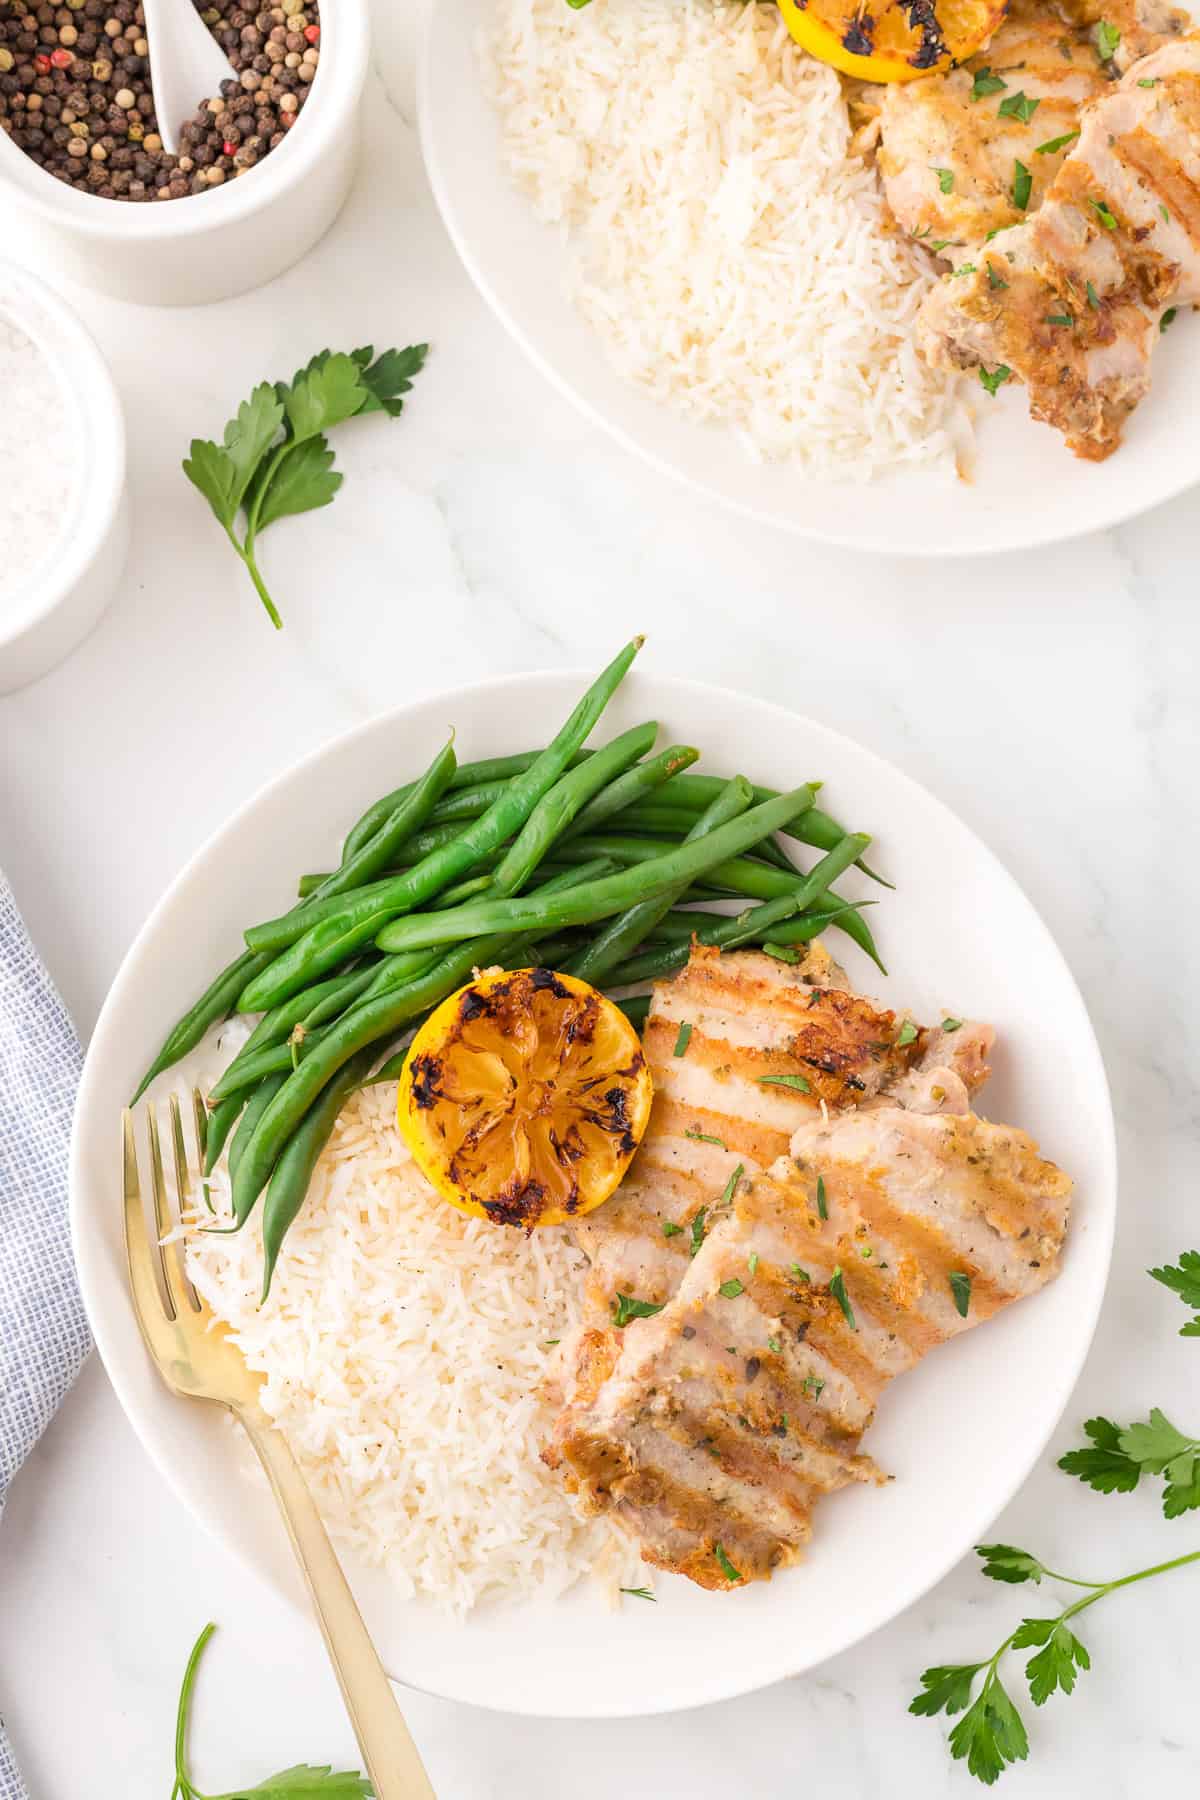 Grilled chicken serve in a plate with rice and green beans.